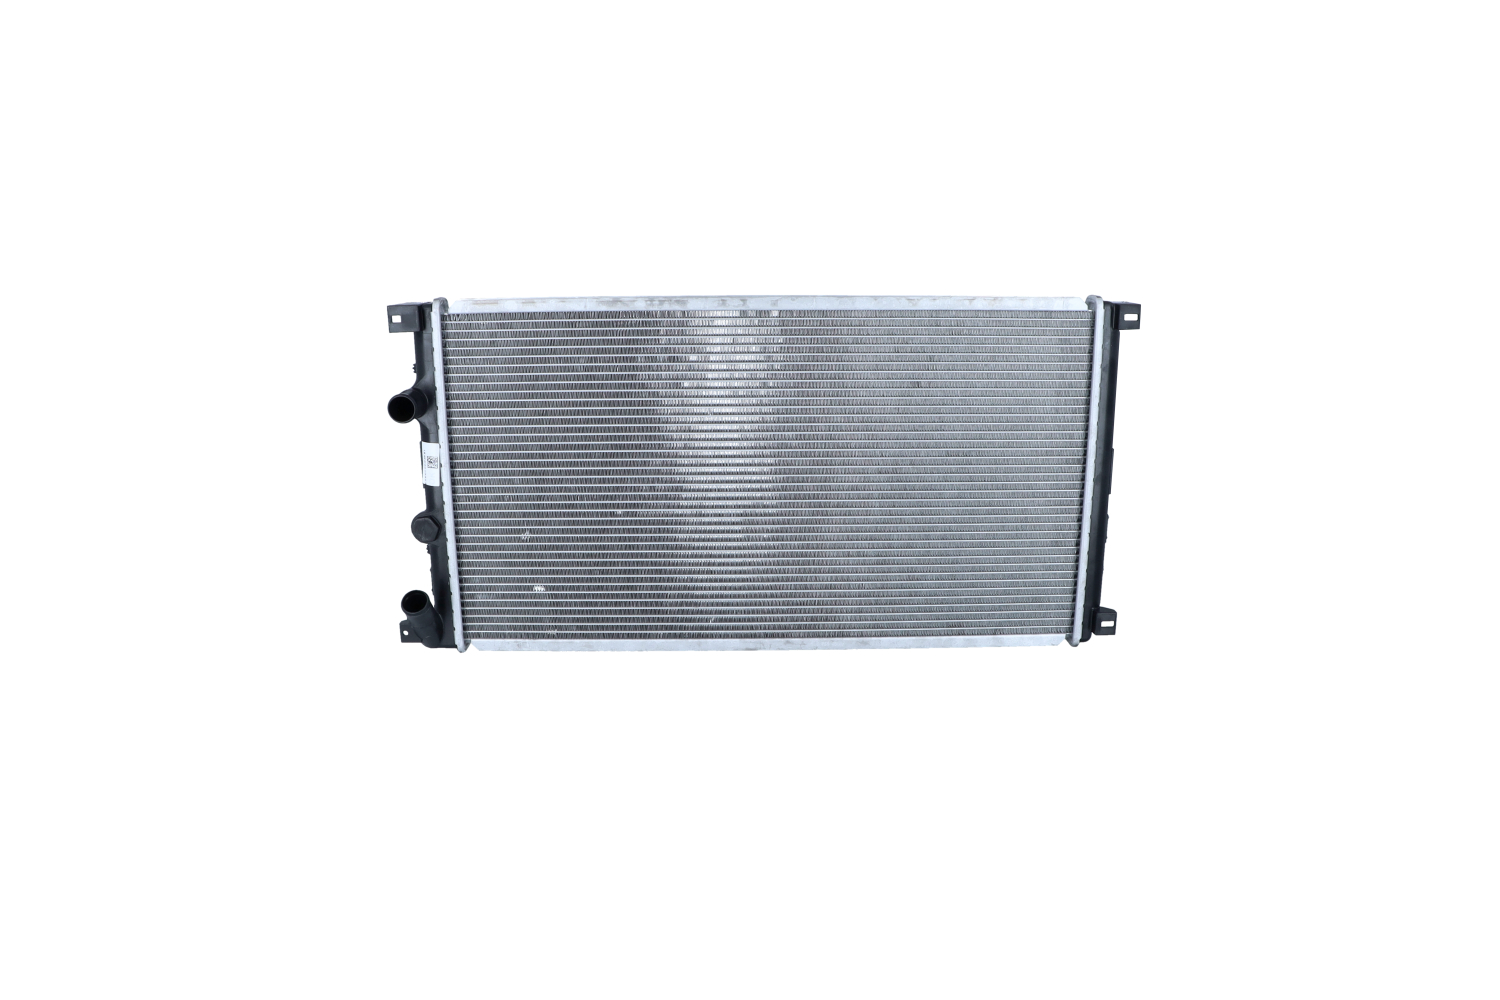 NRF 55350 Engine radiator Aluminium, 730 x 386 x 24 mm, with mounting parts, Brazed cooling fins